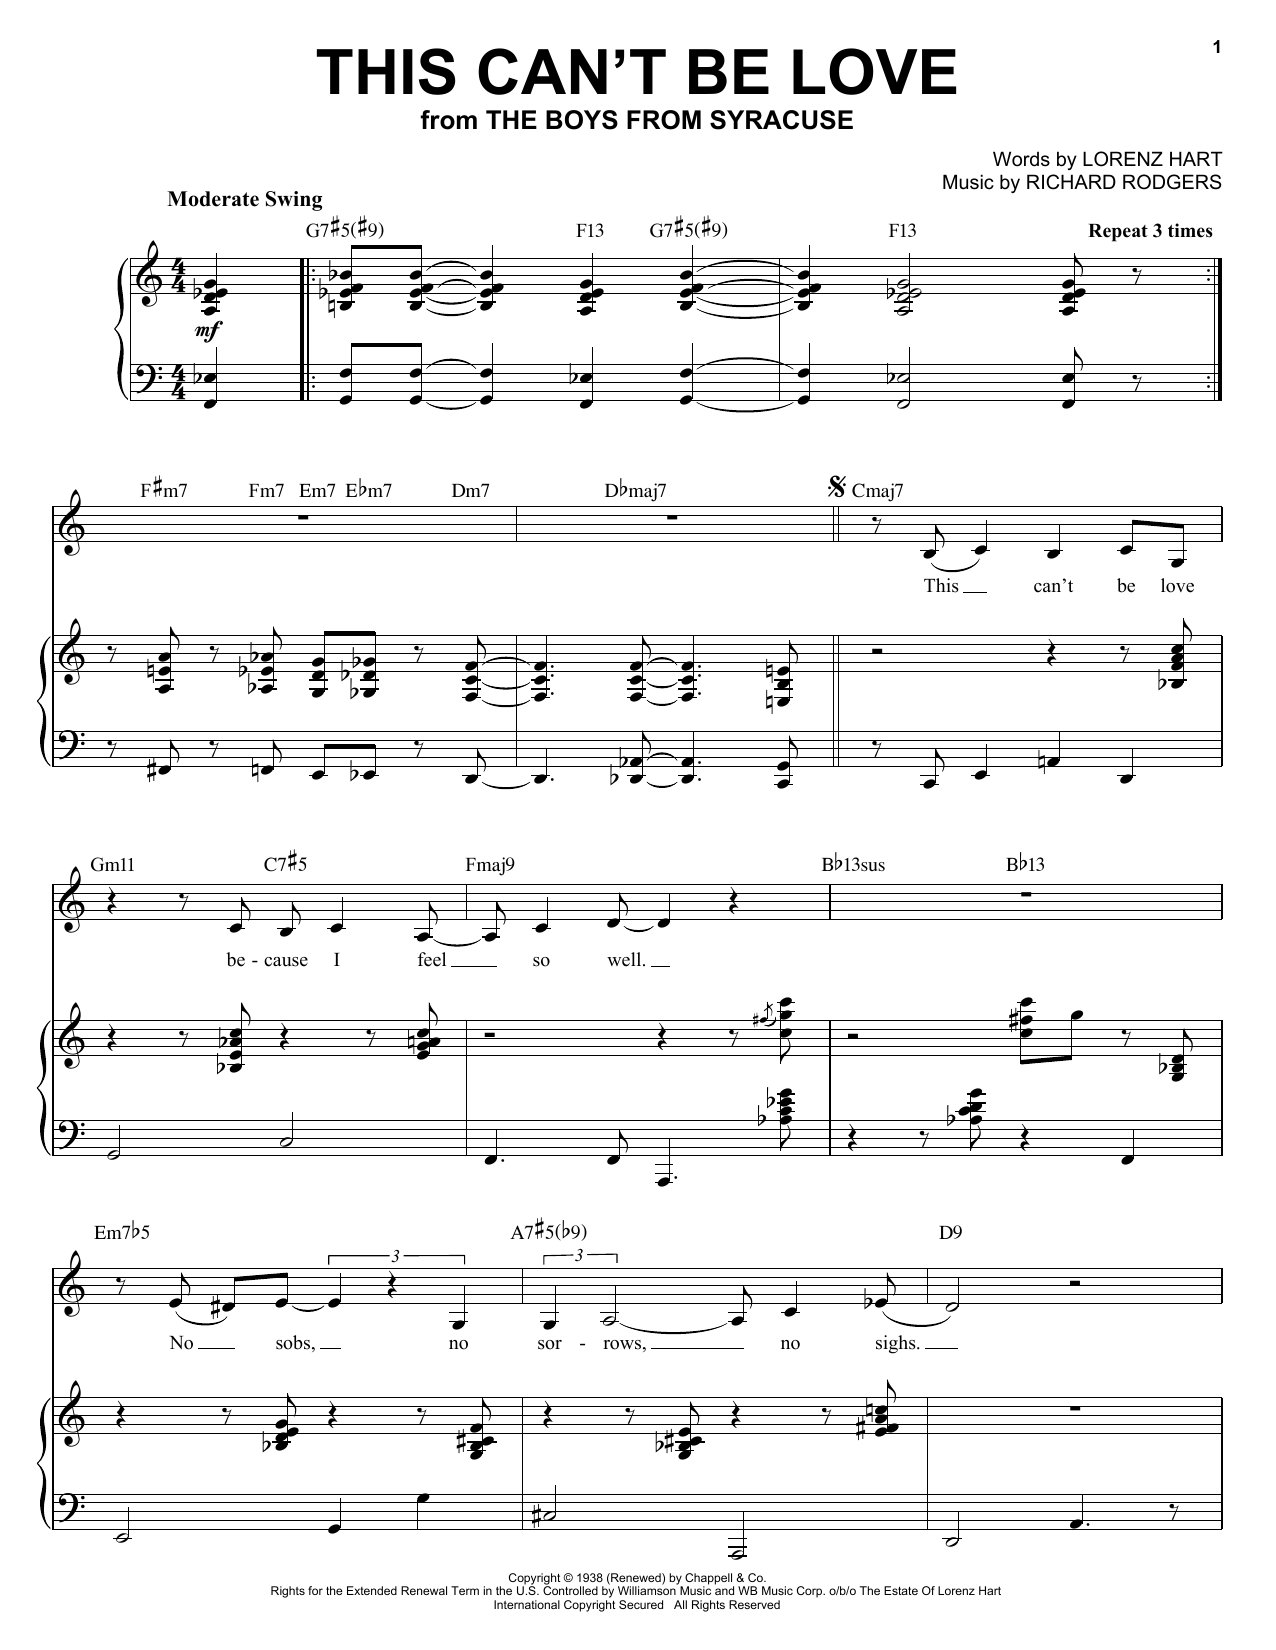 Download Diana Krall This Can't Be Love Sheet Music